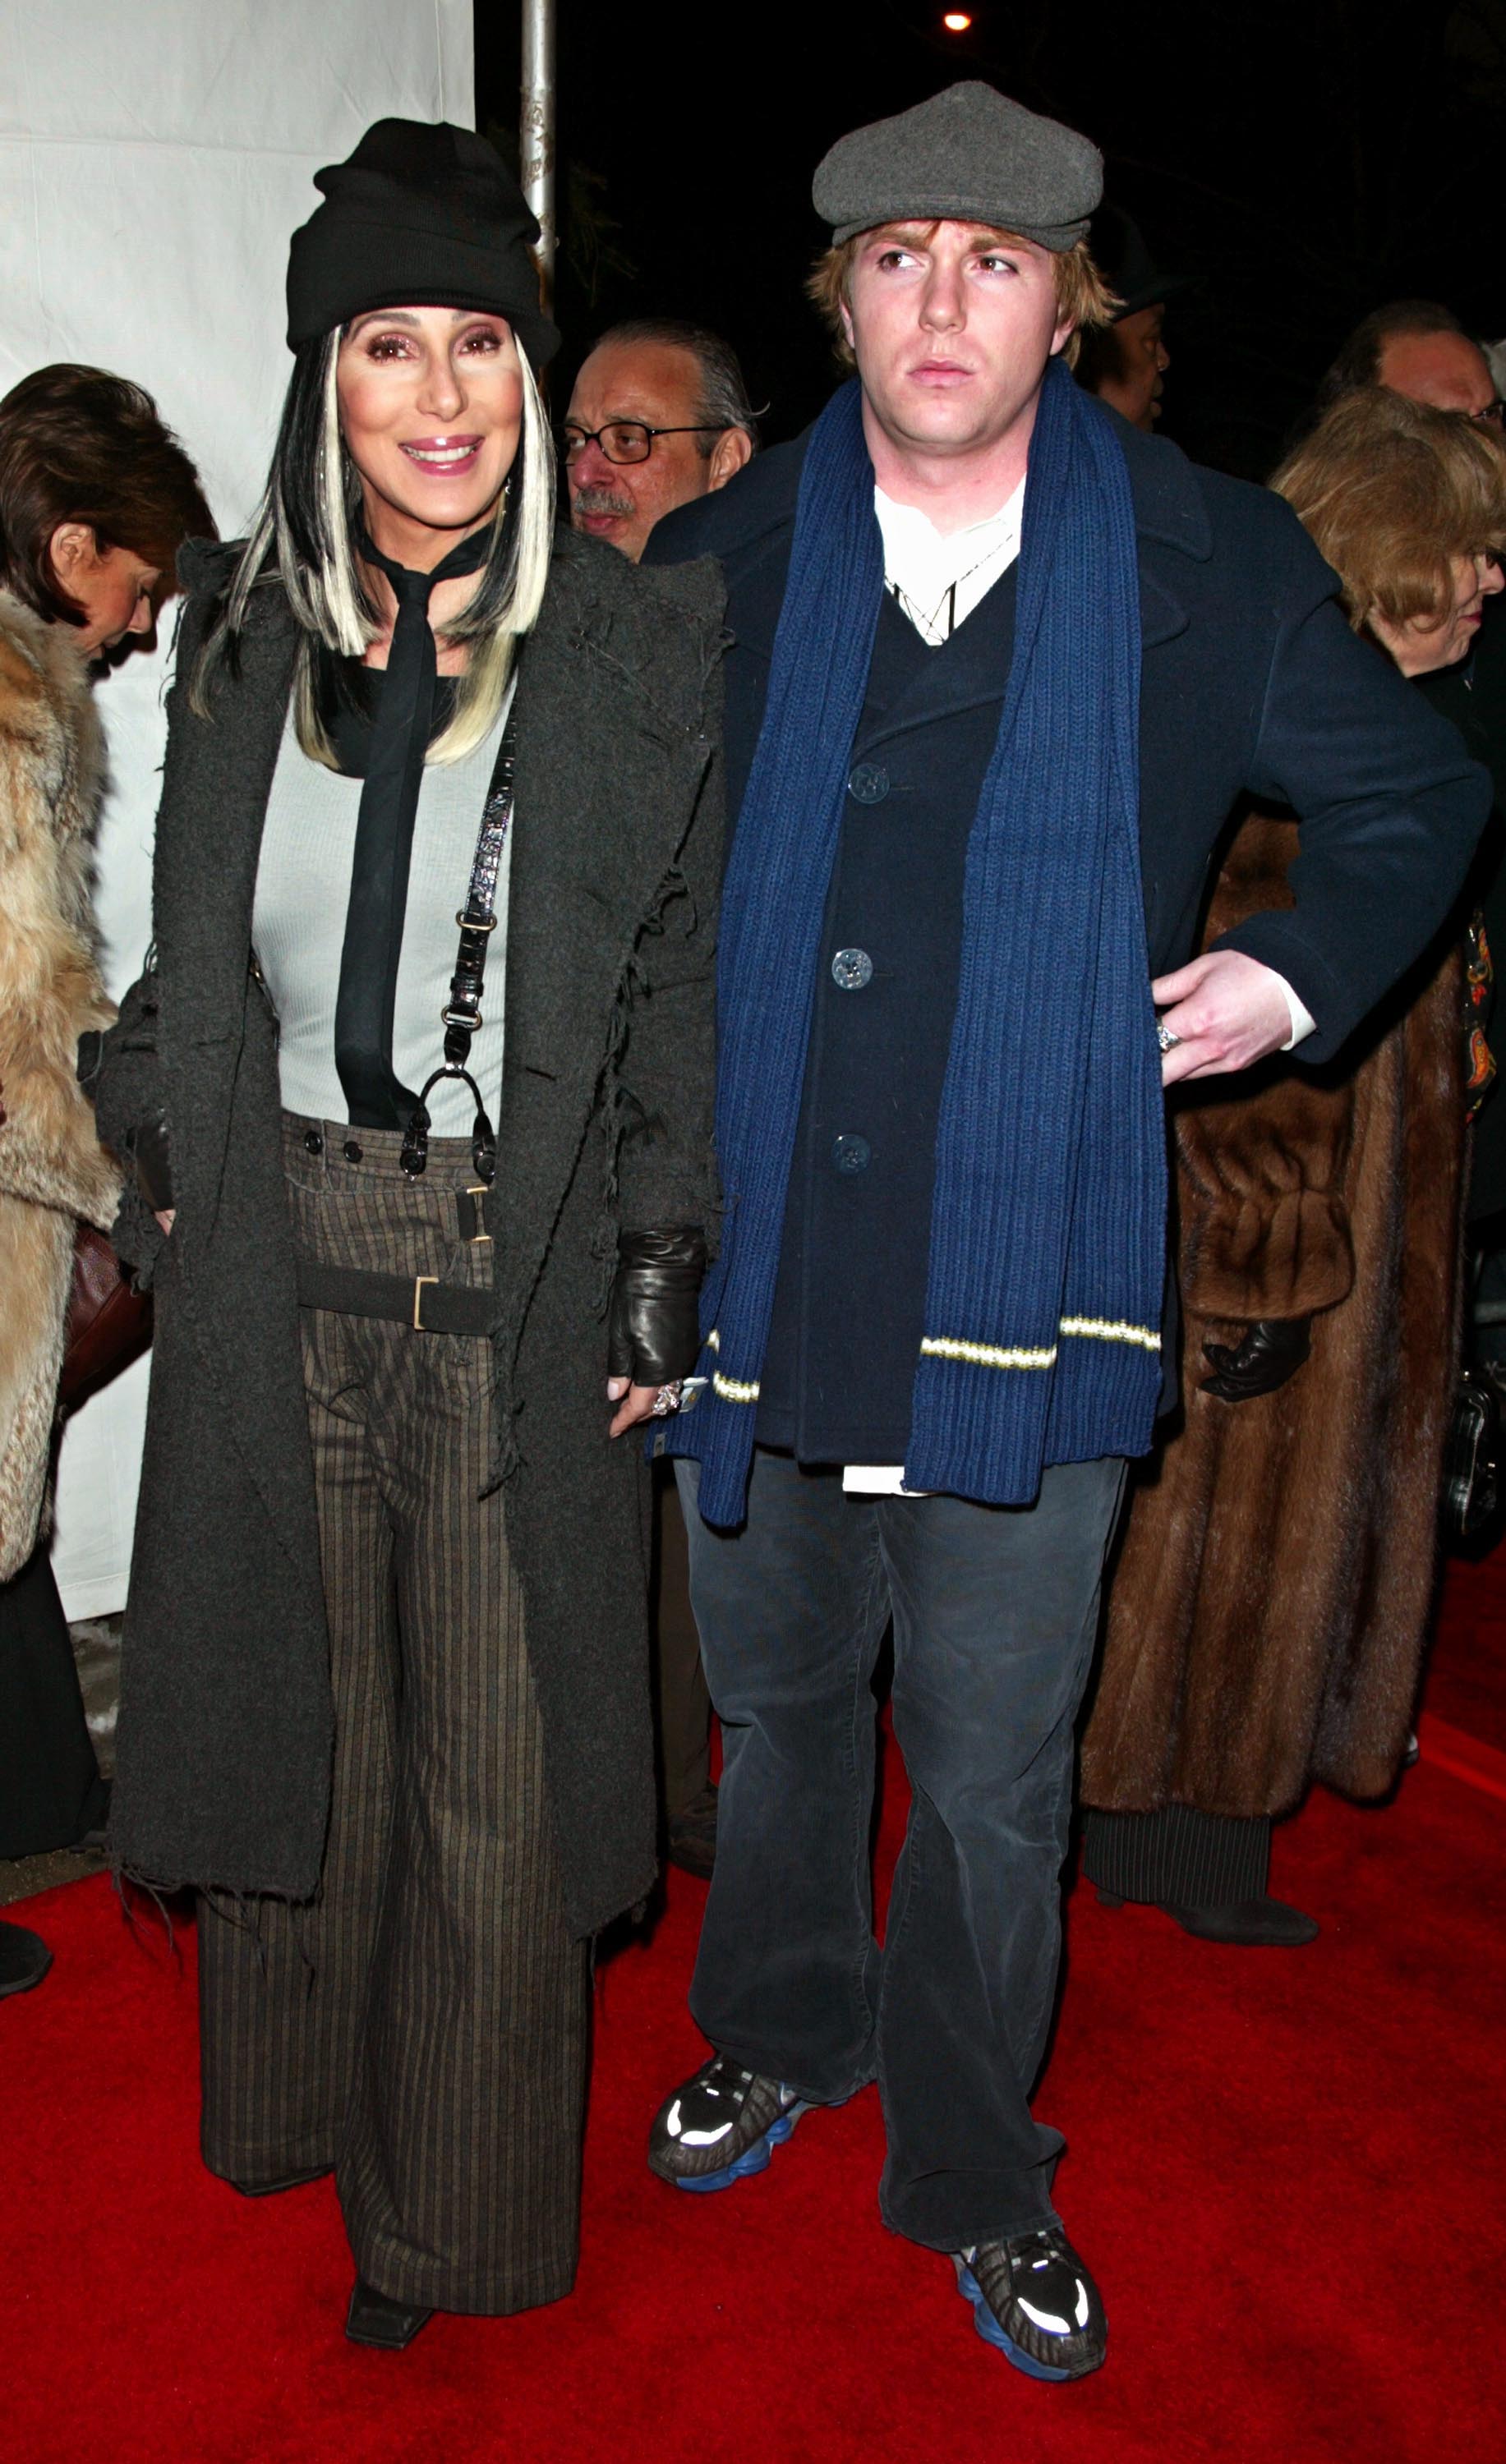 Cher and Elijah Blue Allman at the premiere of "Stuck on You" in New York City in 2003. | Source: Getty Images